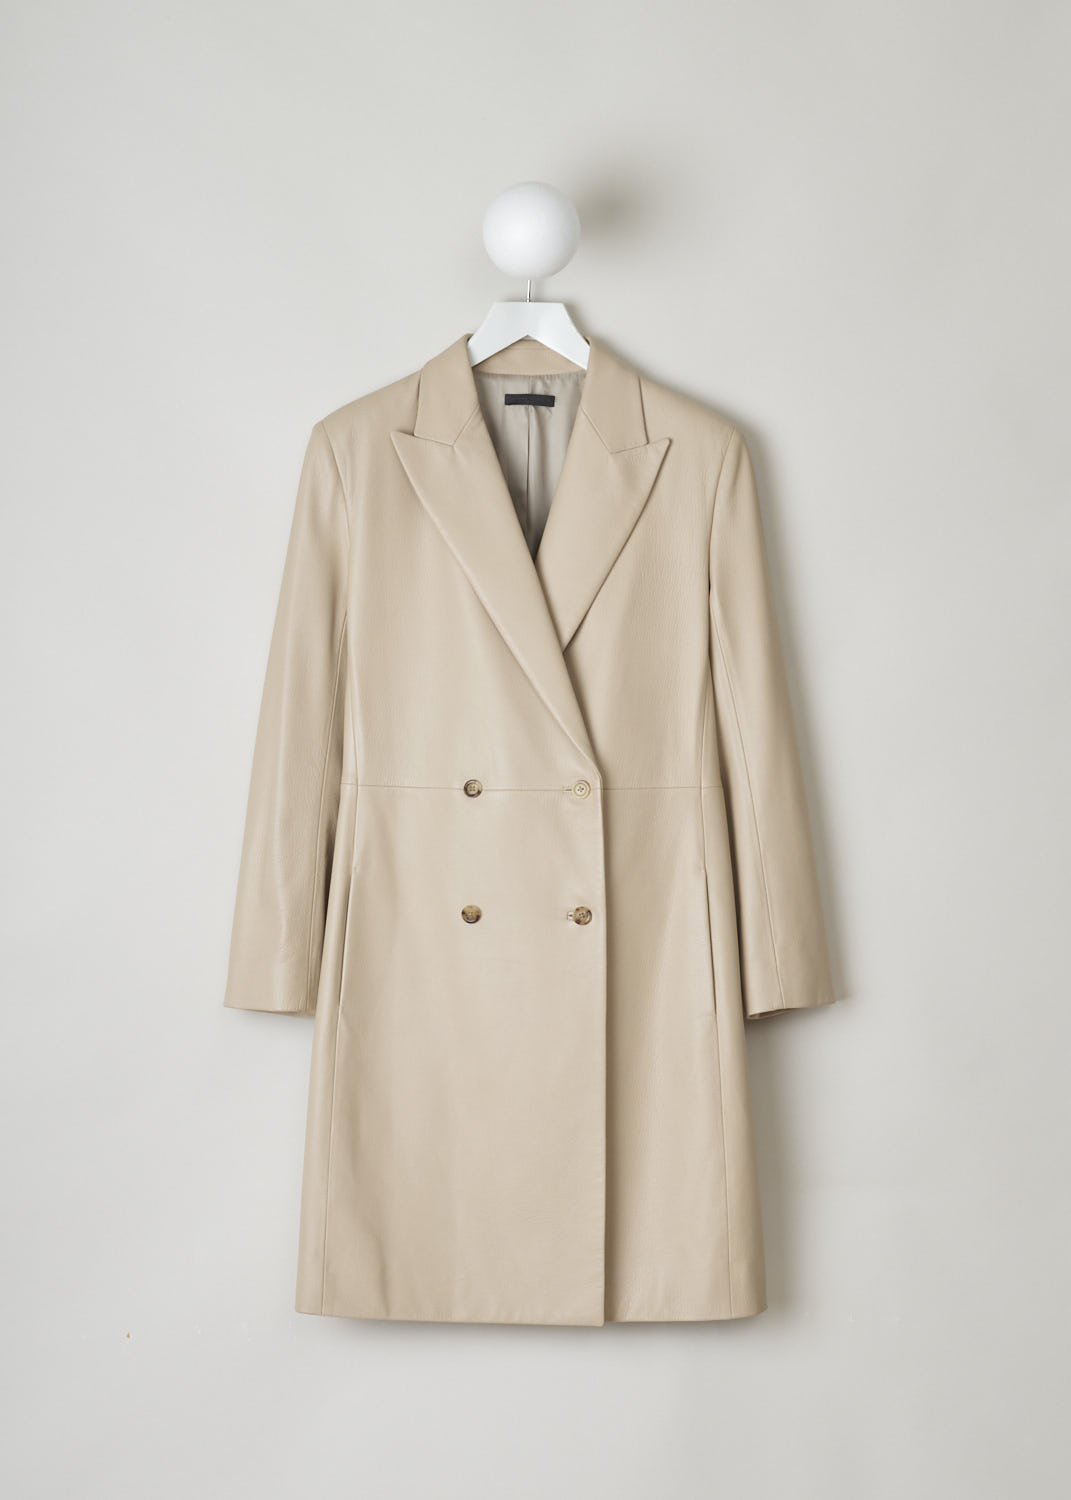 THE ROW, BEIGE LEATHER COAT, GERRICK_I_6I_8L79_SOAPSTONE, Beige, Front, This beautiful double breasted coat has peaked lapels. A decorative, horizontal seam can be found across the front. The coat has two concealed slanted pockets on either side. 
